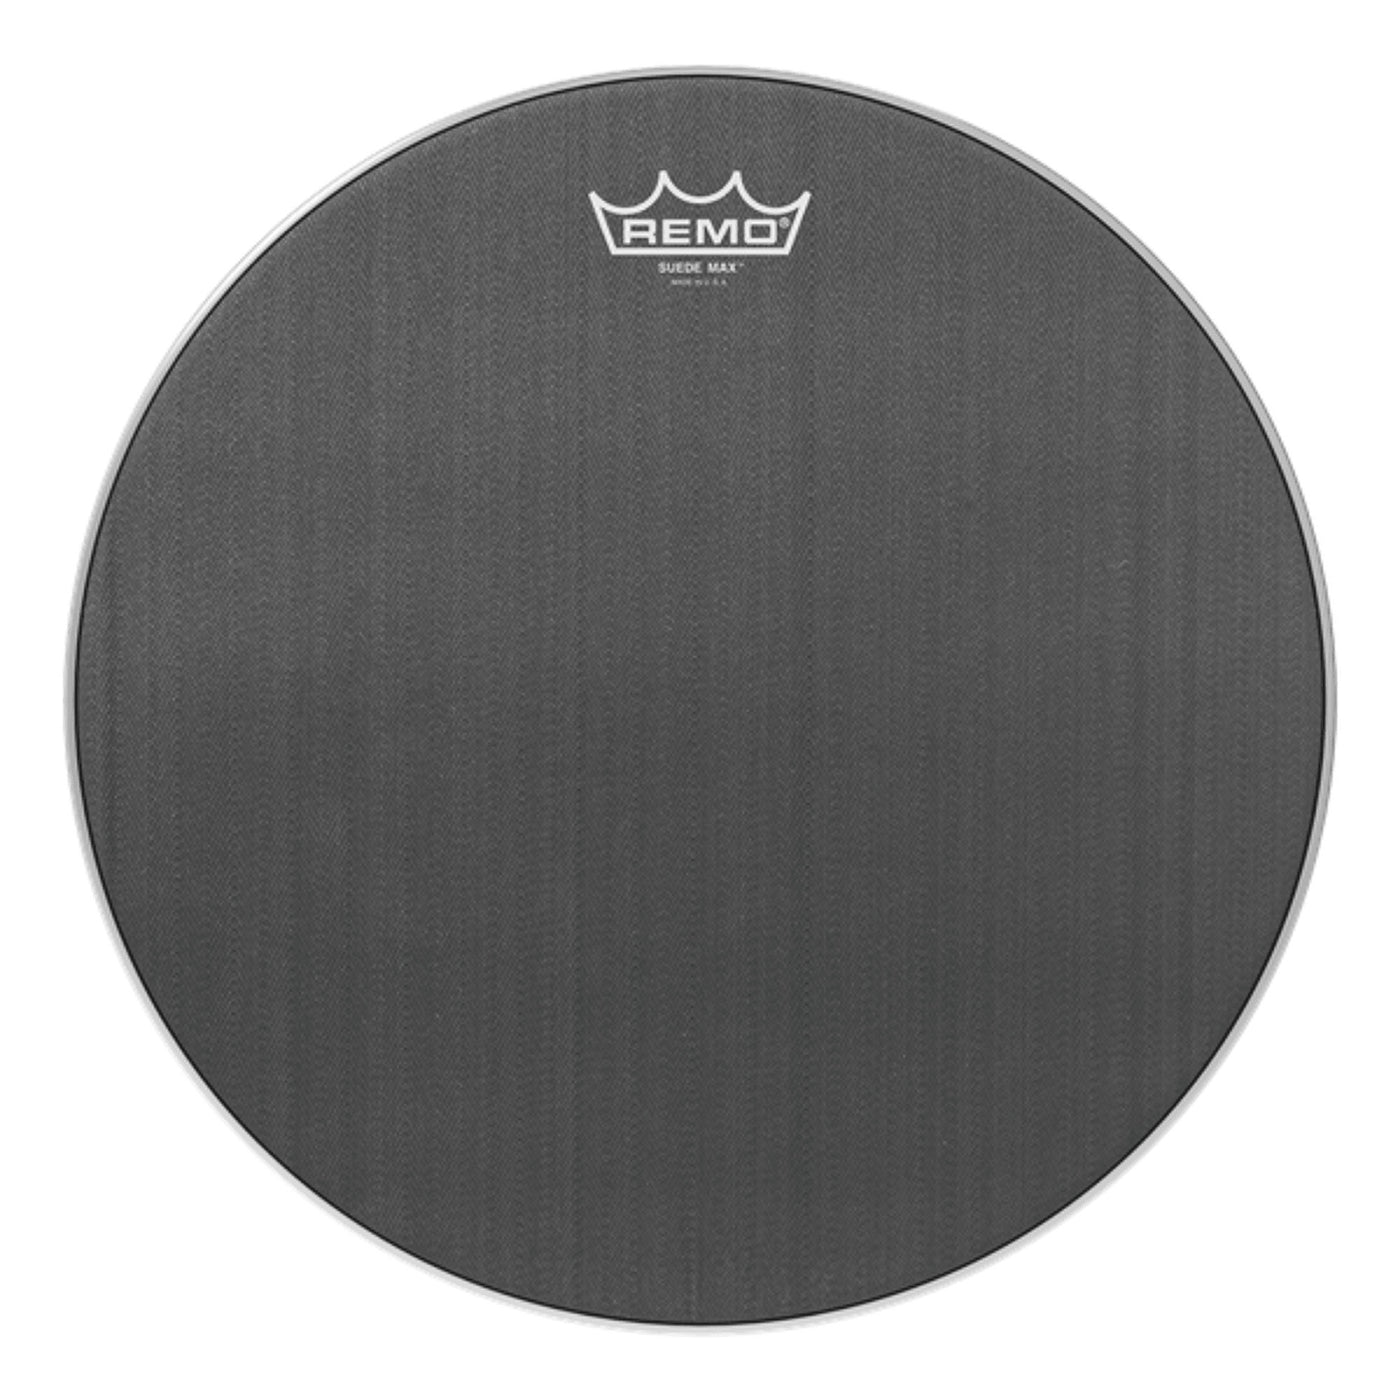 Remo KS-0814-00 14" Suede Max Marching Snare Drum Top (Batter) Head